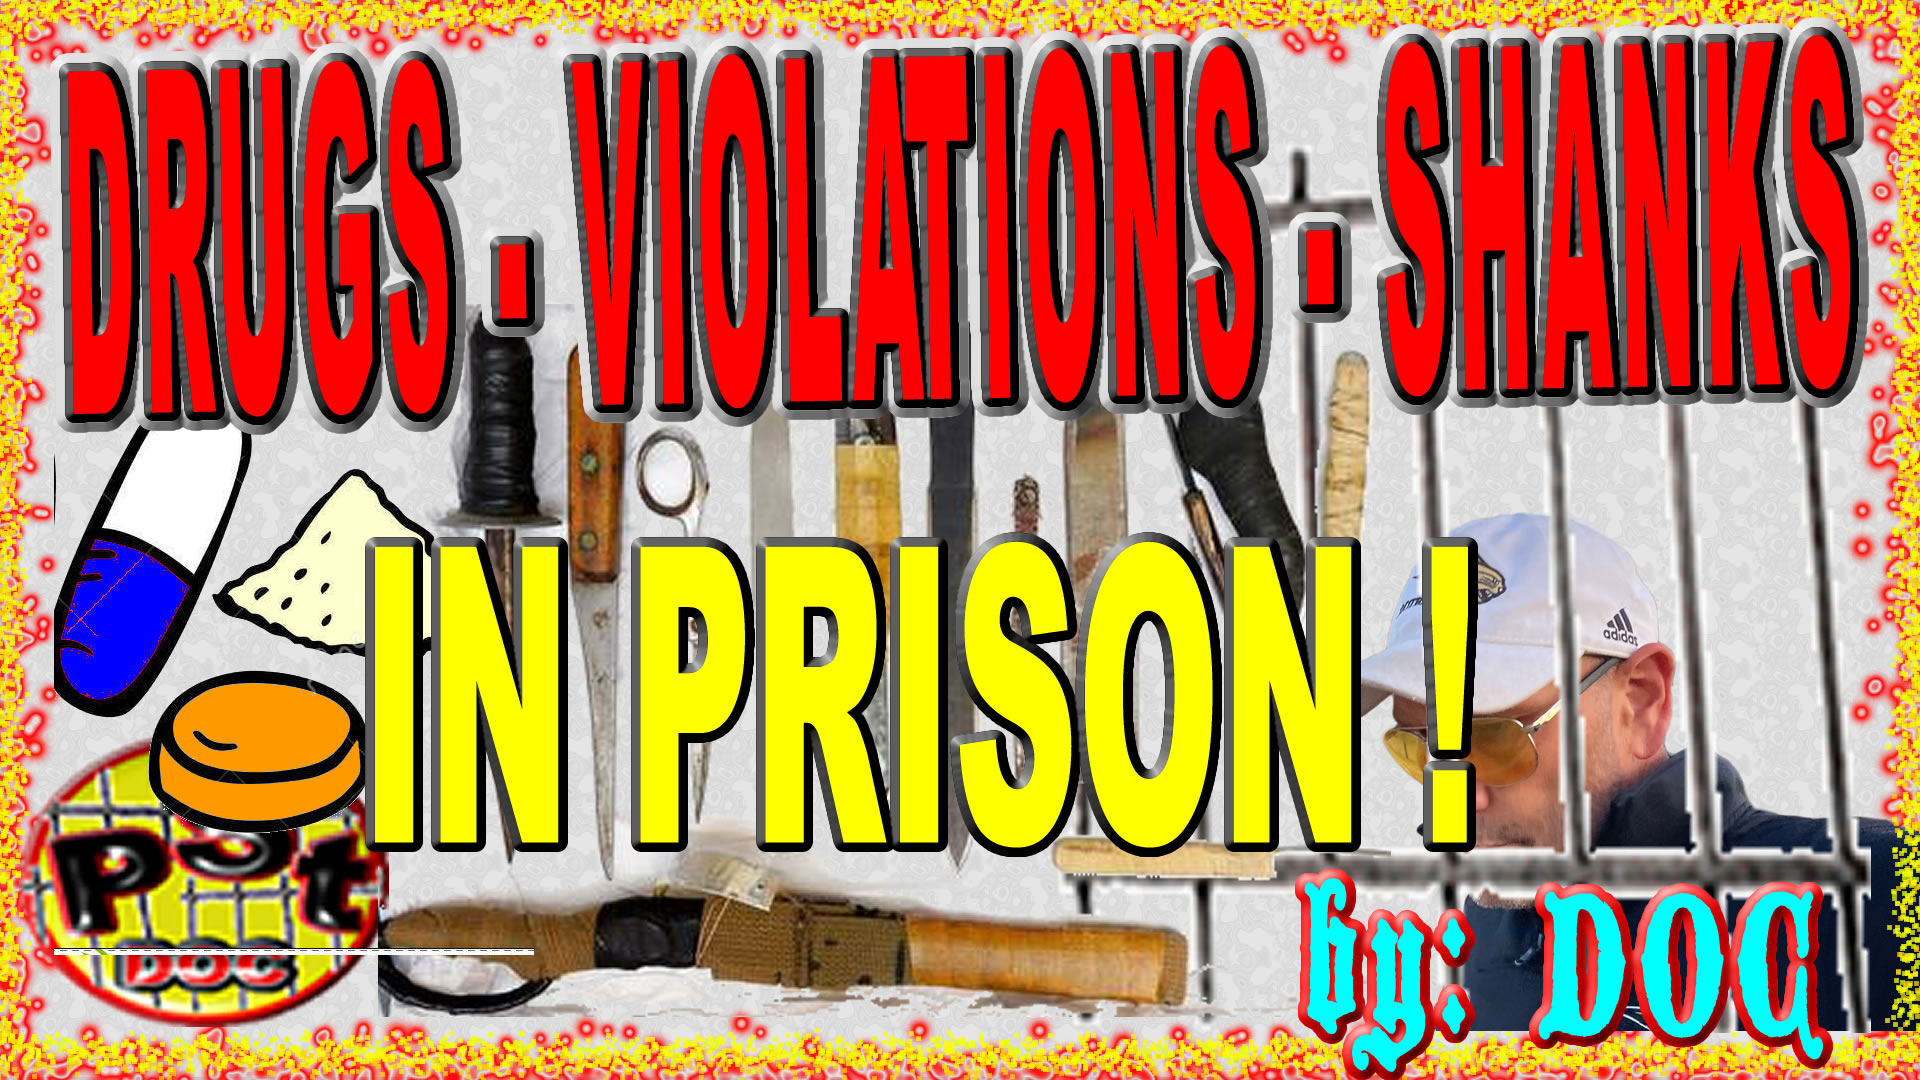 DRUGS - SHANKS - VIOLATIONS in PRISON STORIES TENNESSEE by Doc